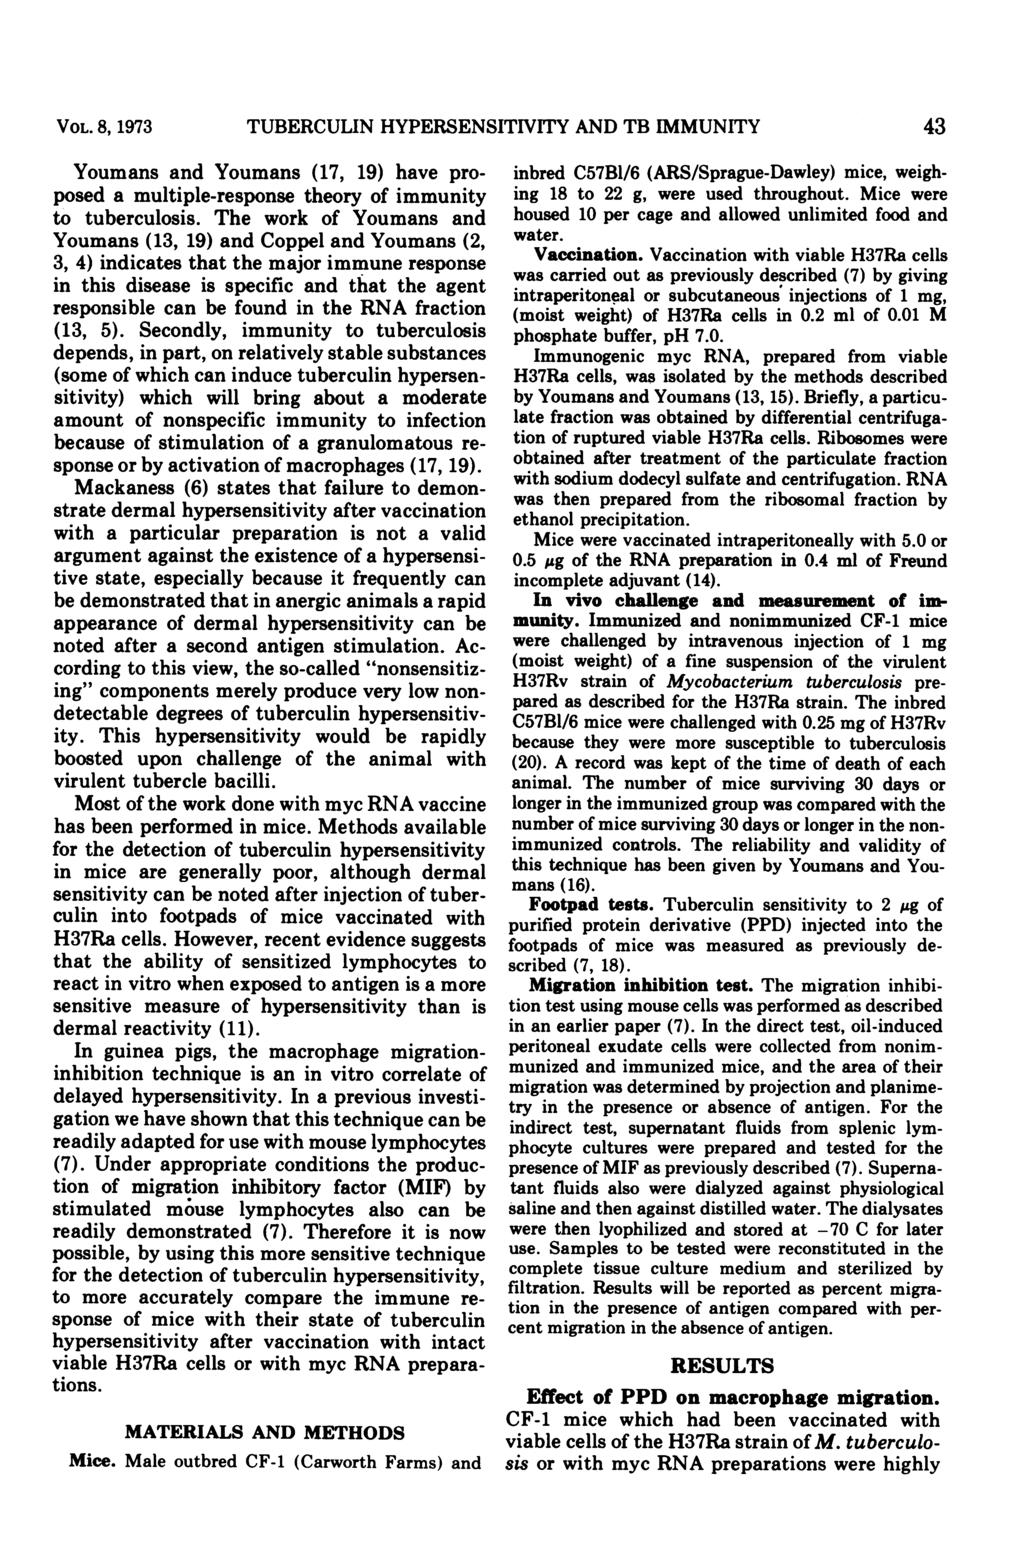 VOL. 8, 1973 TUBERCULIN HYPERSENSITIVITY AND TB IMMUNITY 43 Youmns nd Youmns (17, 19) hve proposed multiple-response theory of immunity to tuberculosis.